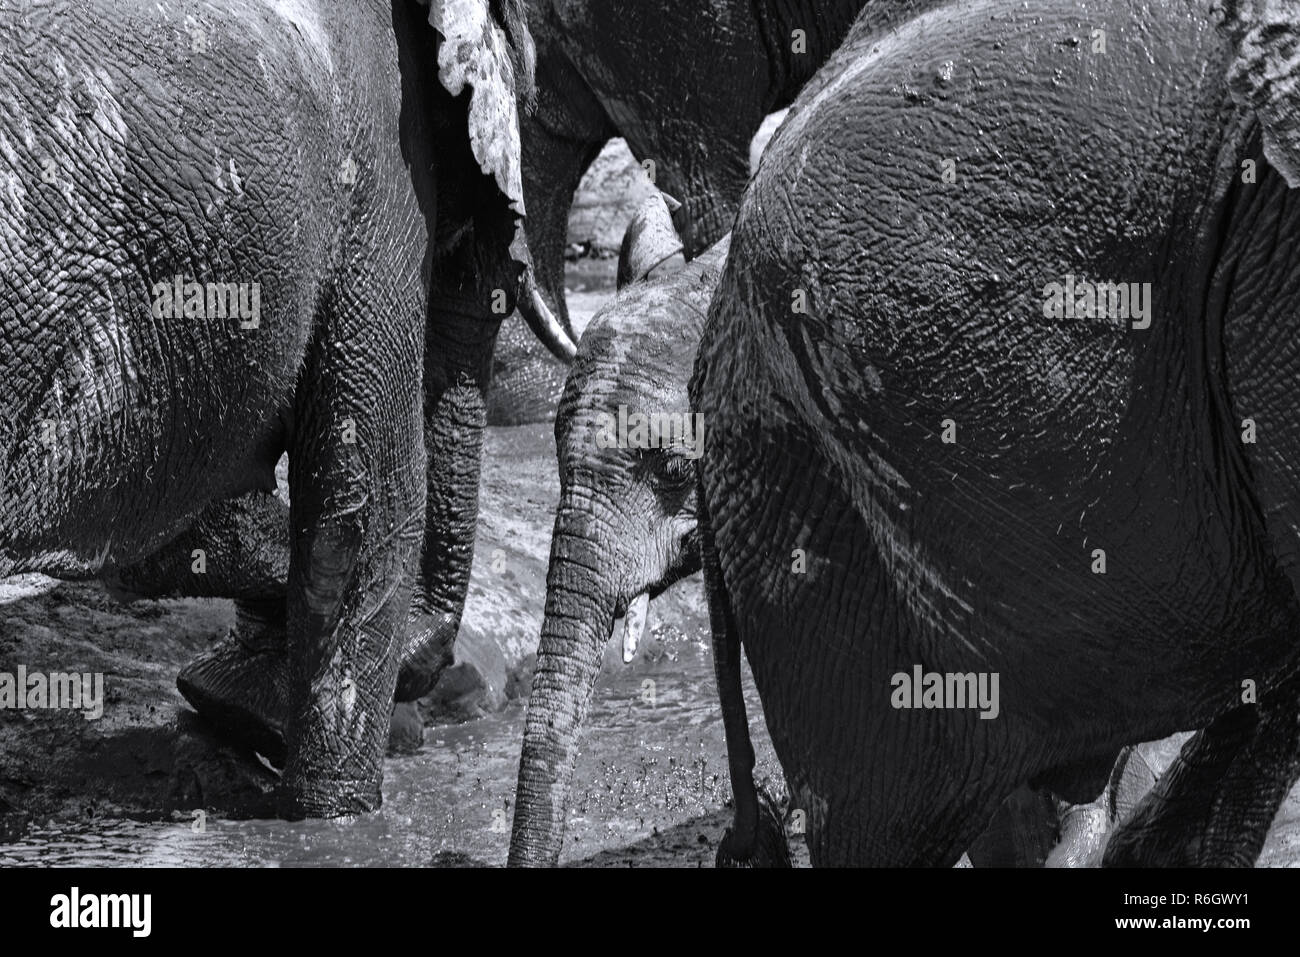 Elephant group at the mud bath in the Chobe River, Botswana in black and white. Stock Photo